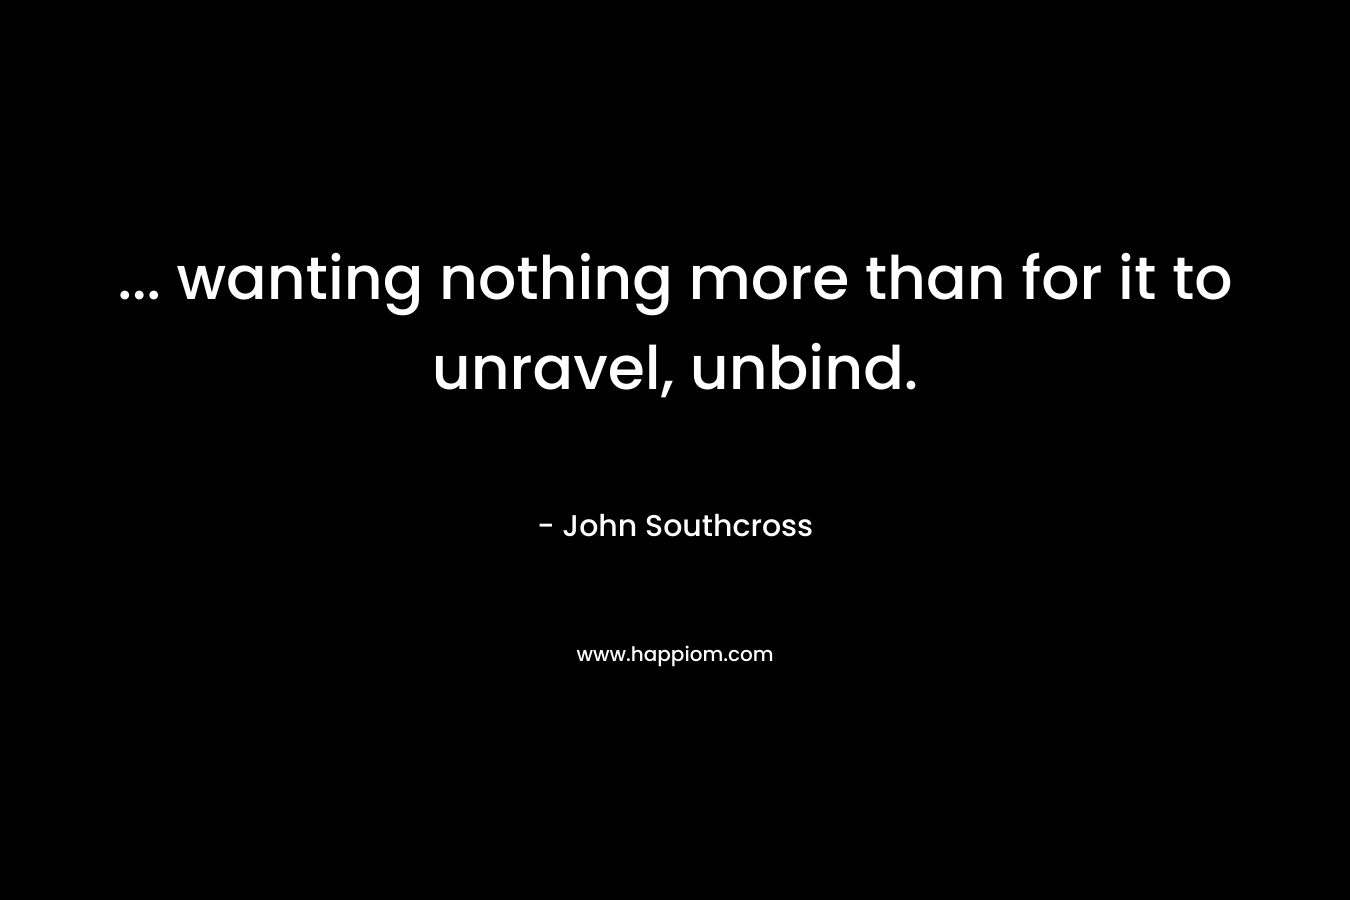 ... wanting nothing more than for it to unravel, unbind.